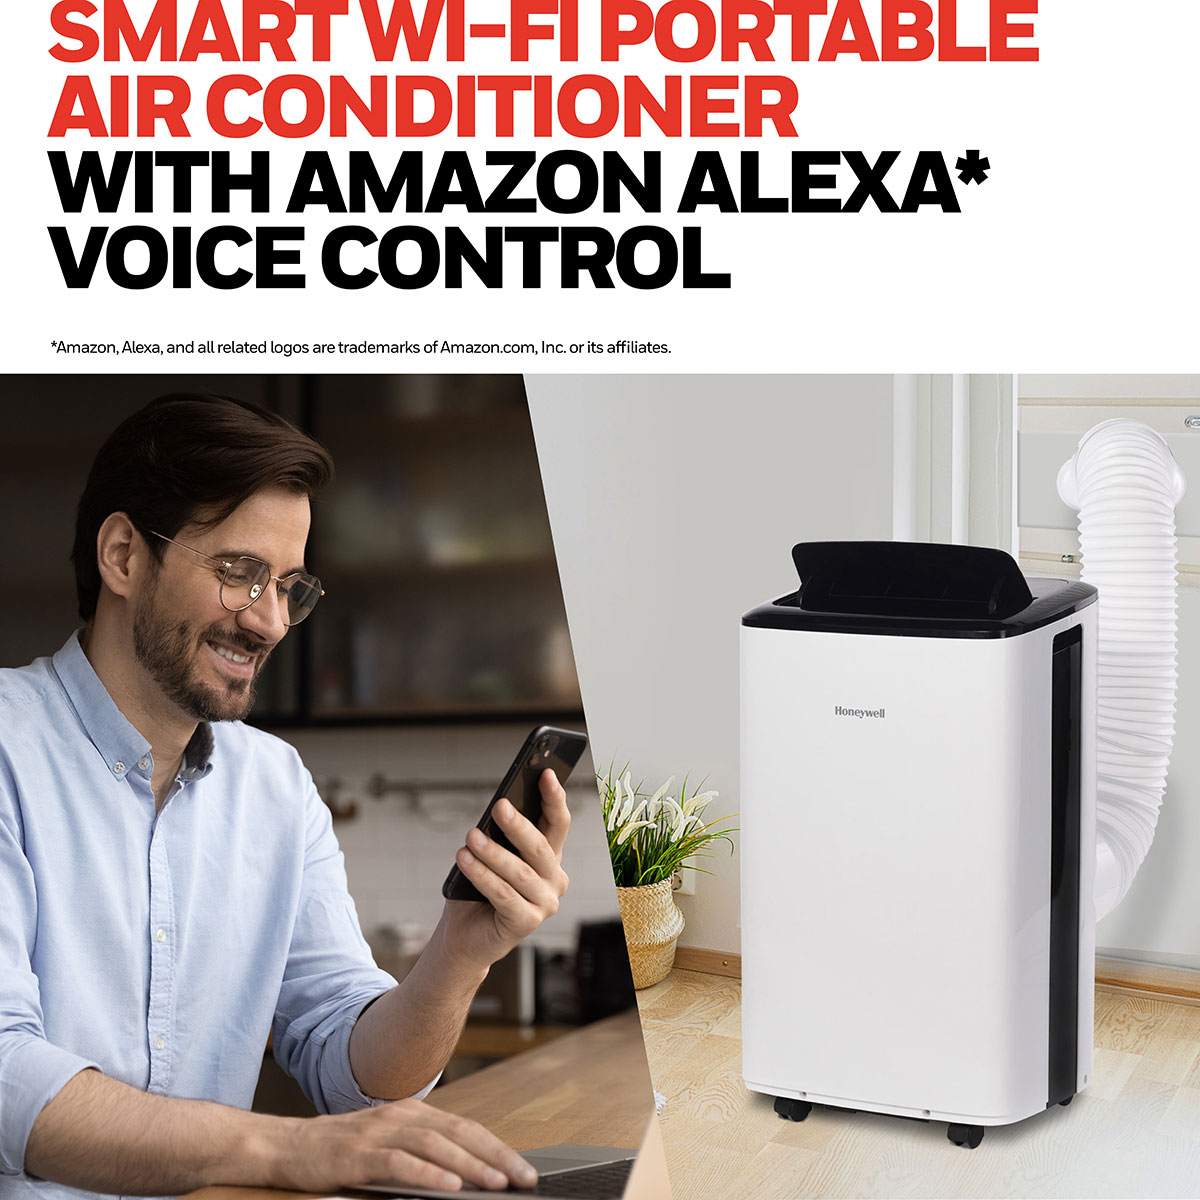 https://www.honeywellstore.com/store/images/products/large_images/hf-smart-wi-fi-portable-air-conditioner-6.jpg